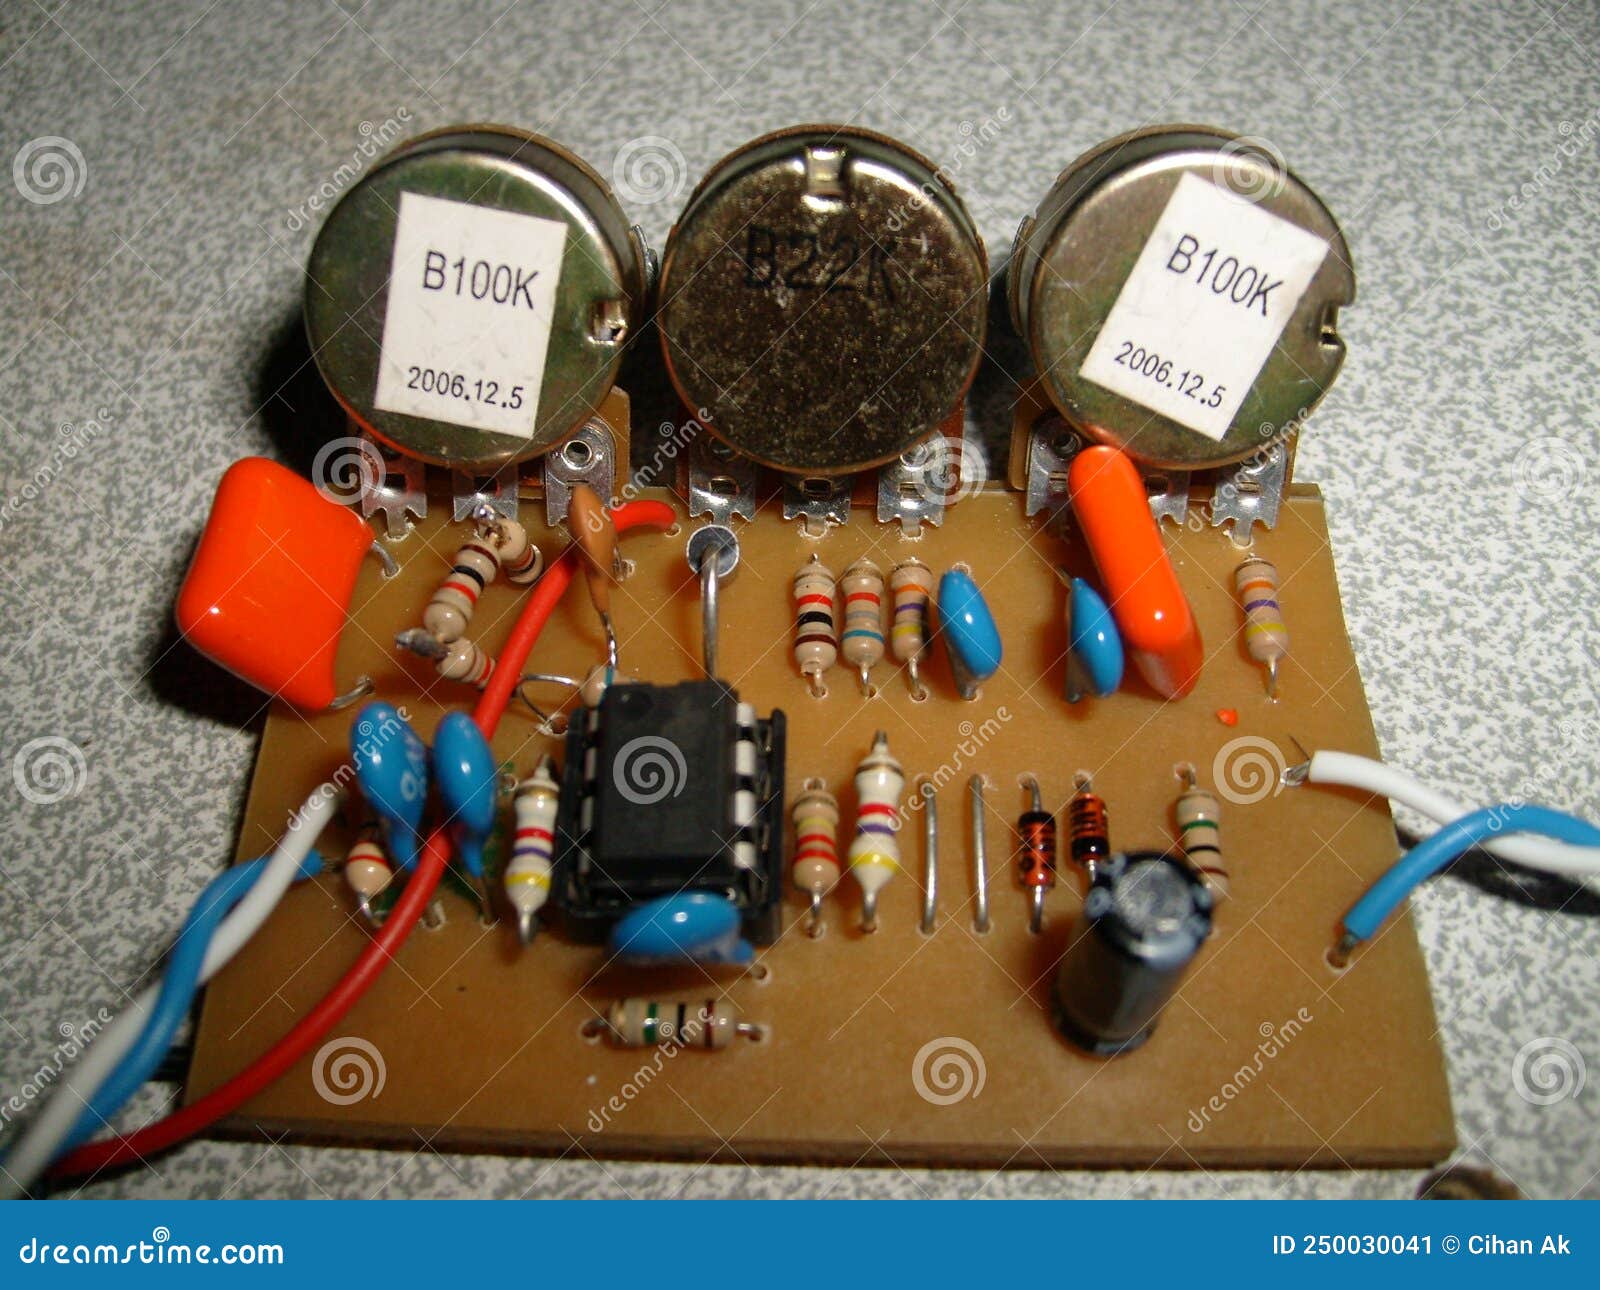 tube amplifier head and wirring parts transformers tube sockets pcb 45